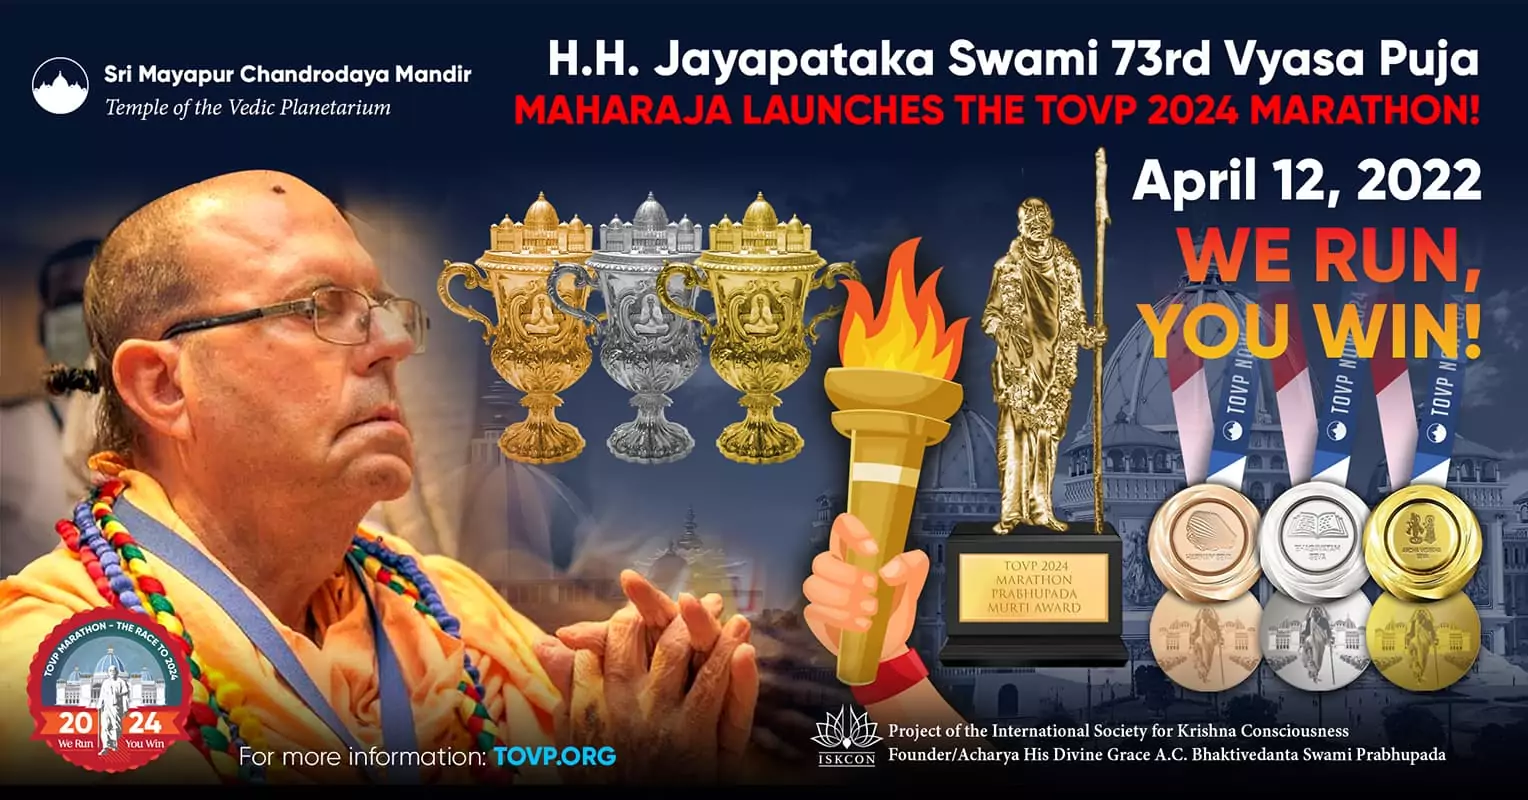 H.H. Jayapataka Swami Flags Off the Official Launch of the TOVP 2024 Marathon on his 73rd Vyasa Puja Celebration